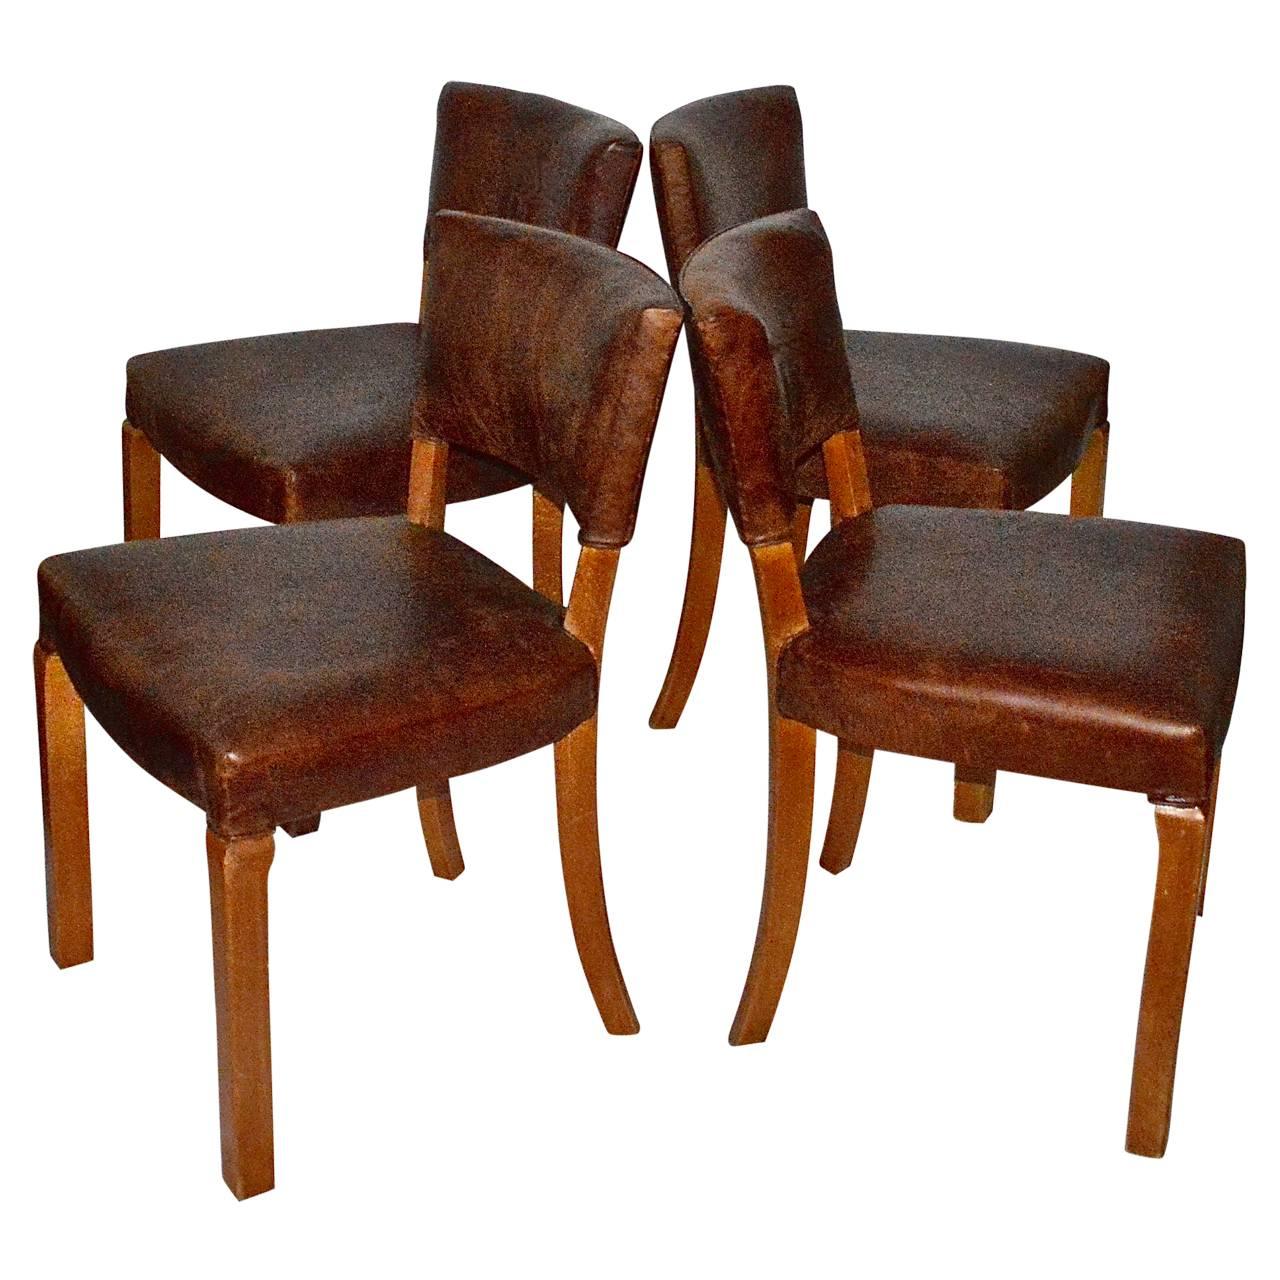 Four beautiful Art Deco dining chair, in a lovely patinated birchwood and newly upholstered in vintage leather.